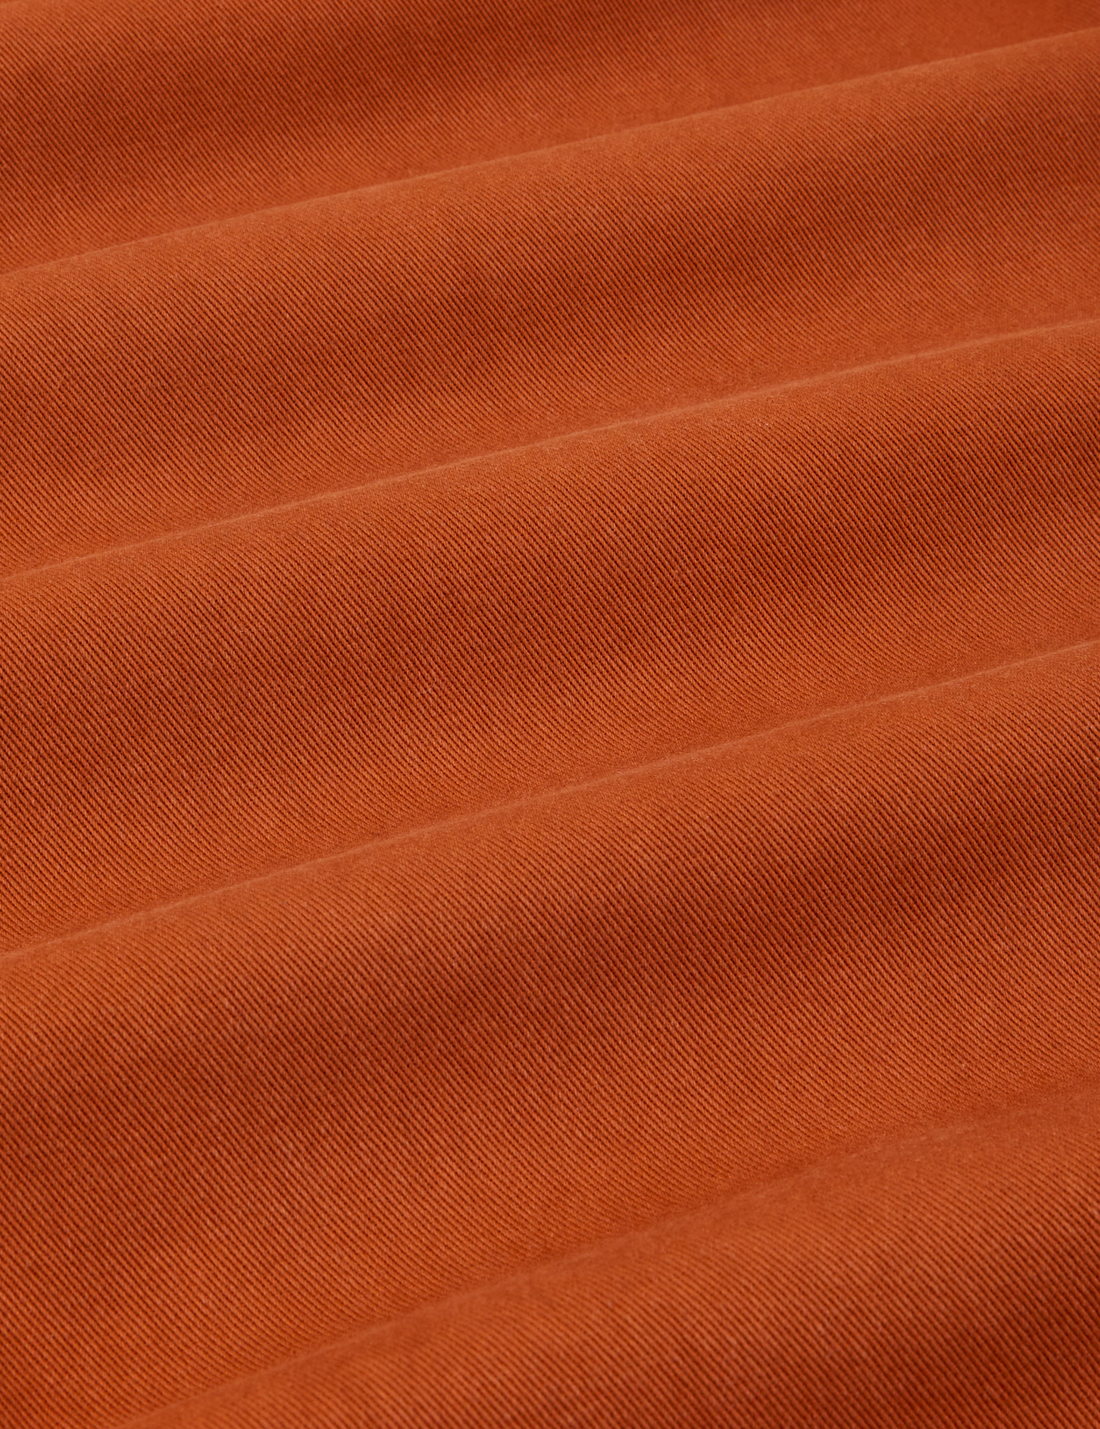 Heavyweight Trousers in Burnt Terracotta fabric detail close up